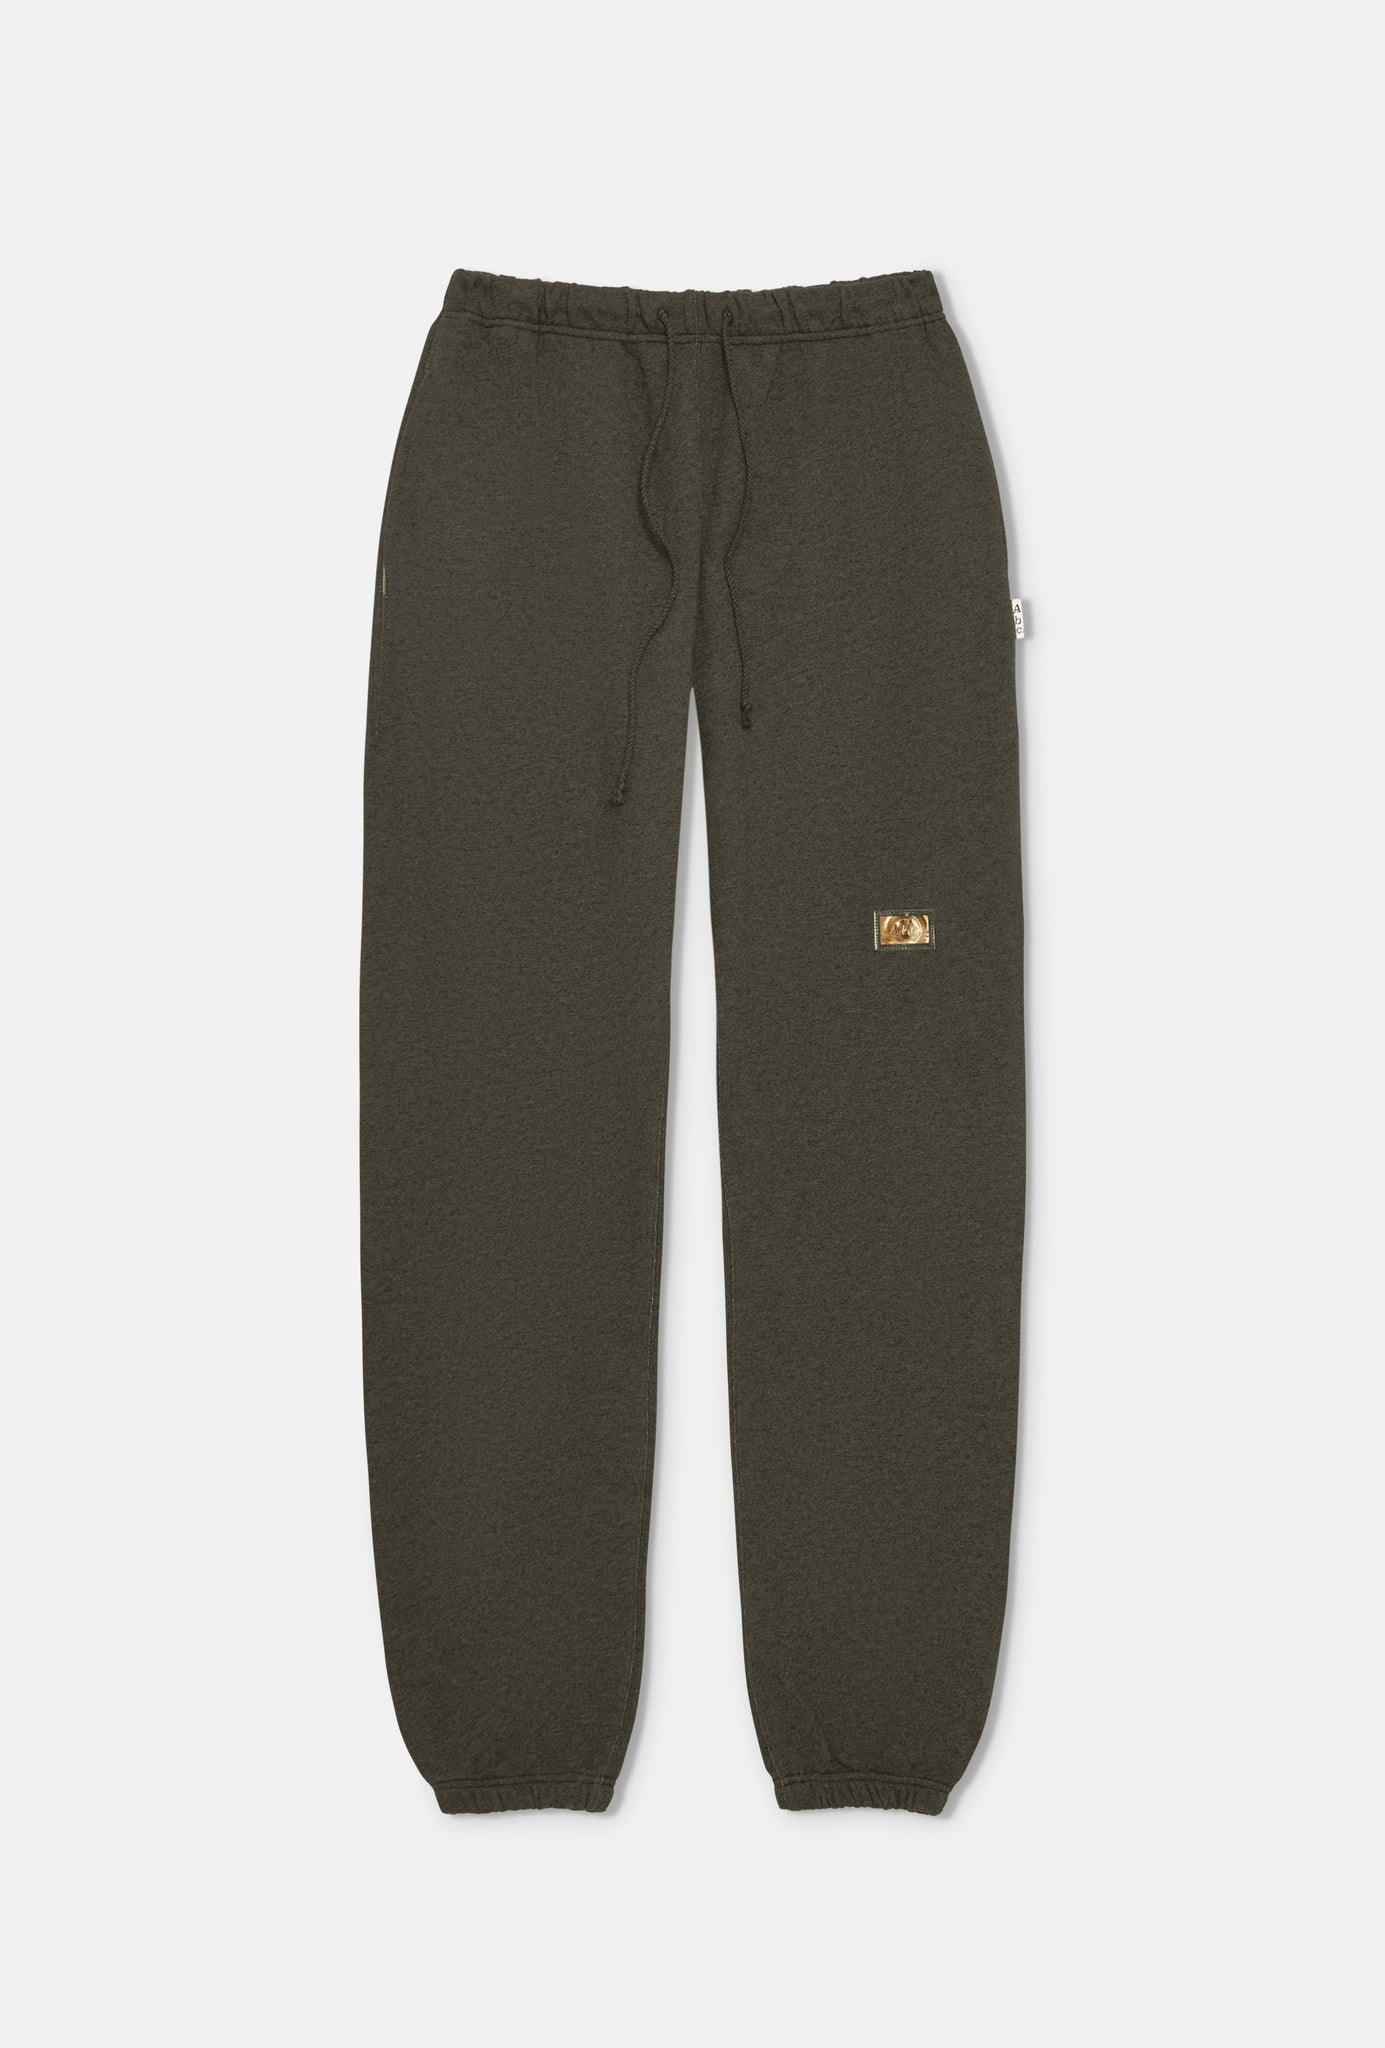 Abc. 123 Hologram French Terry Sweatpants (SS24)- Army Green